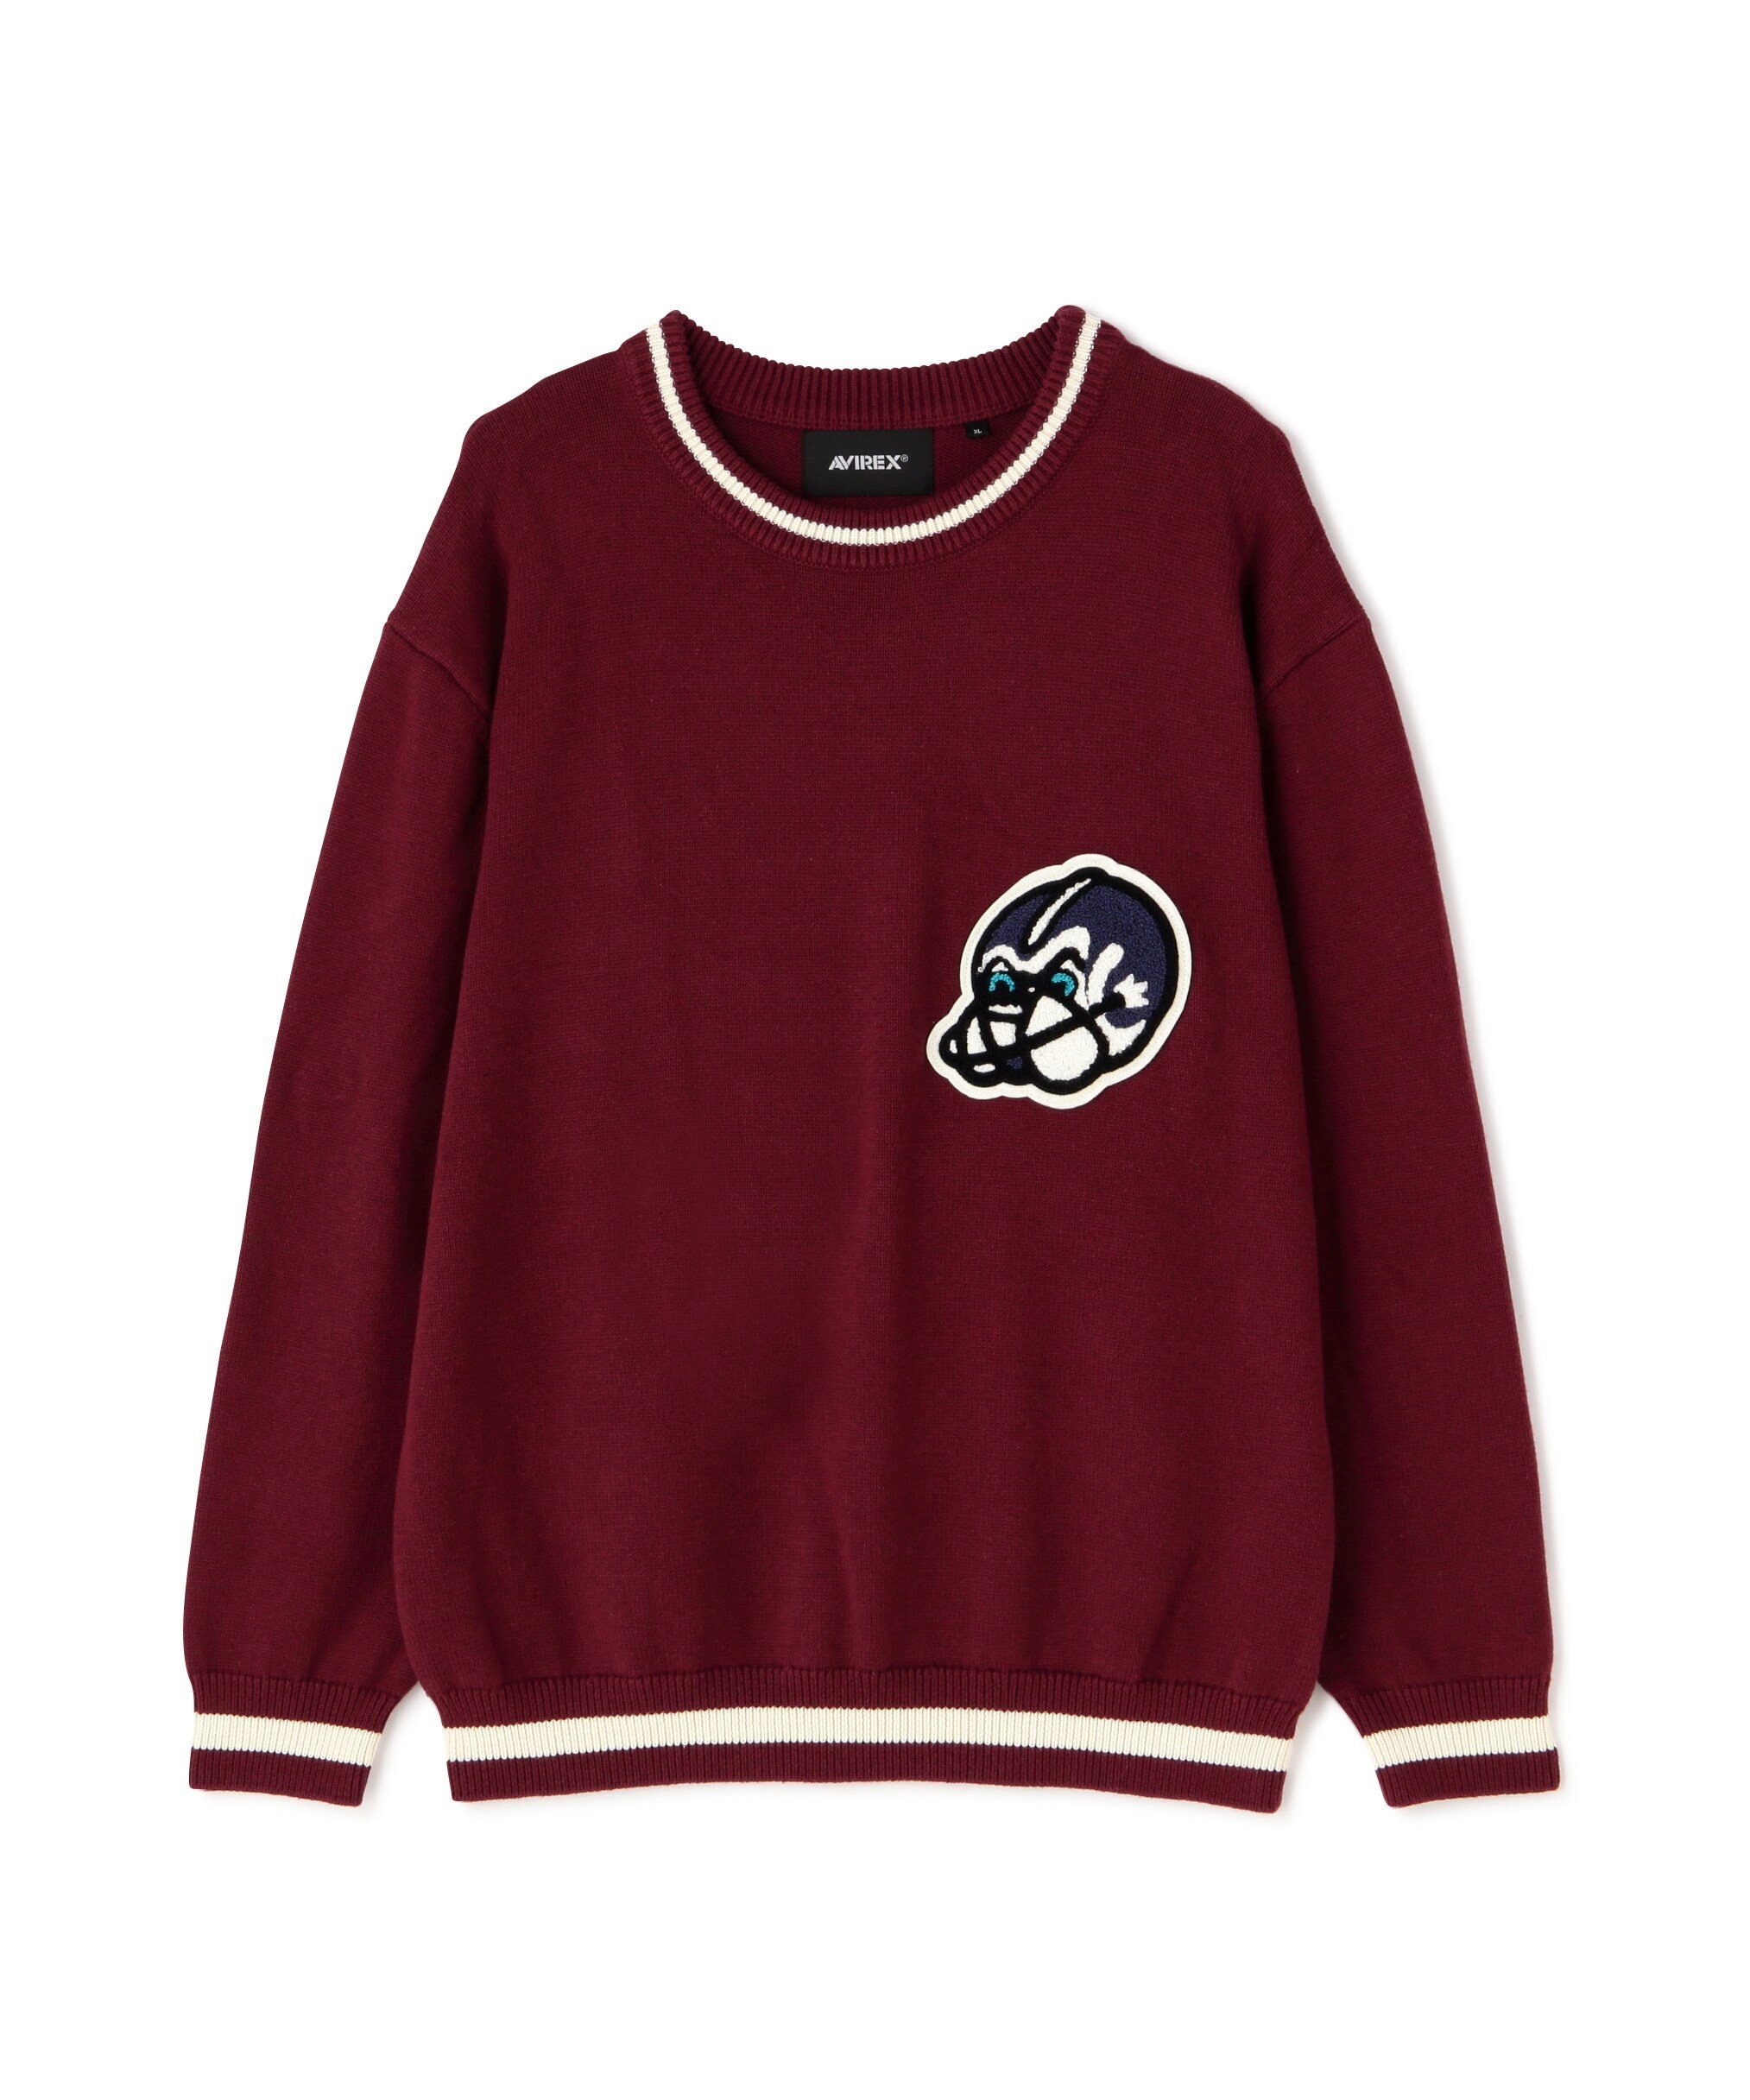 AVIREX｜LETTERED CHENILLE PATCH CREW NECK SWEATER / レタード